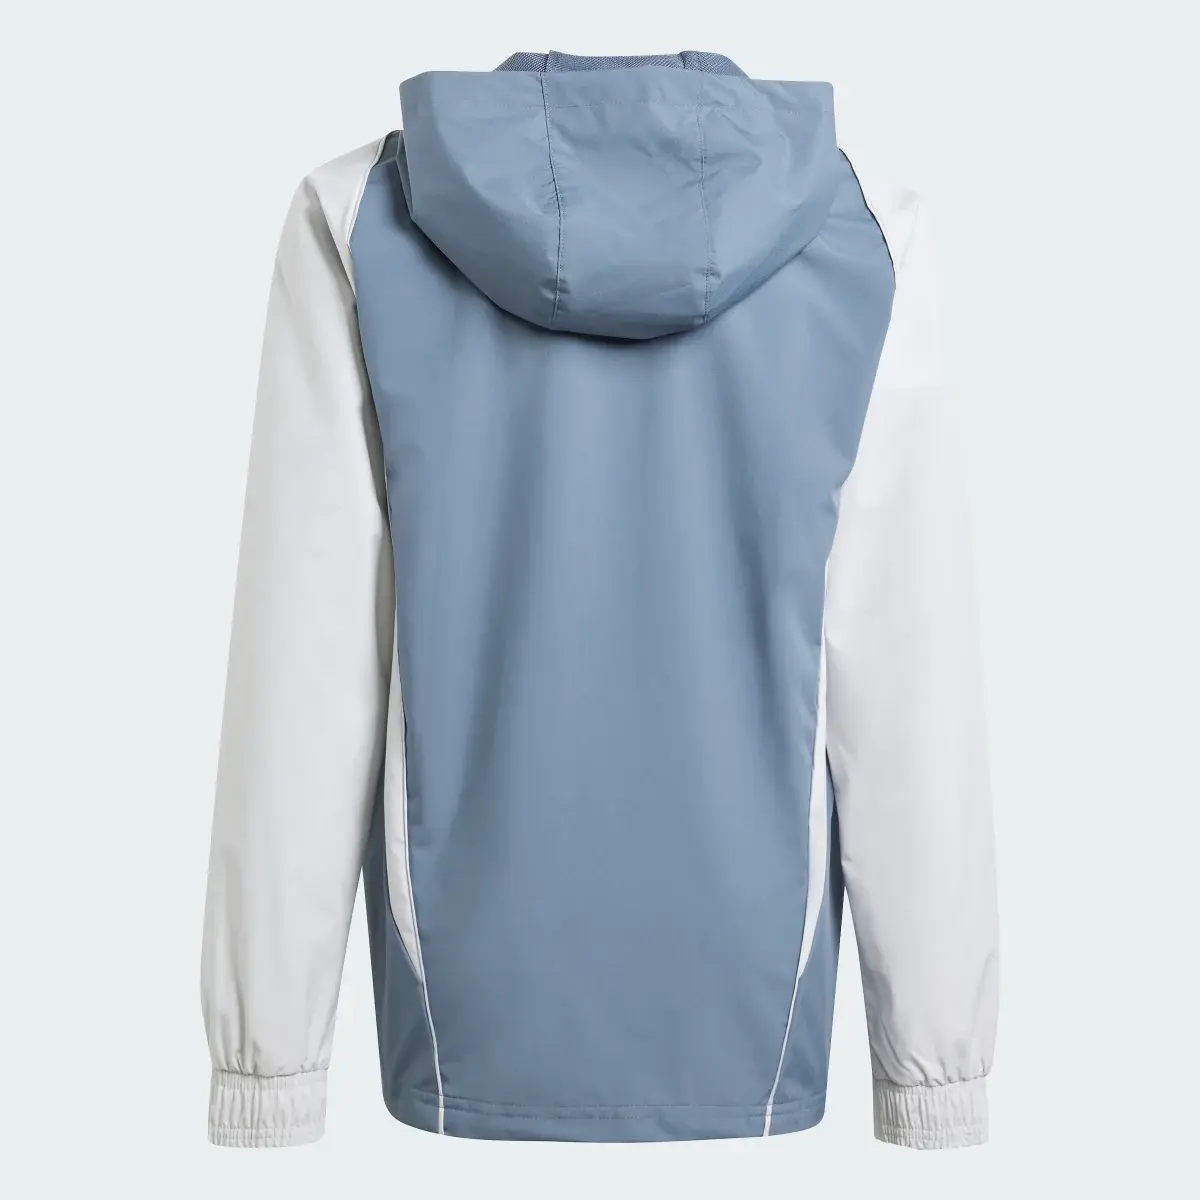 Adidas Tiro 23 Competition All-Weather Jacket. 2